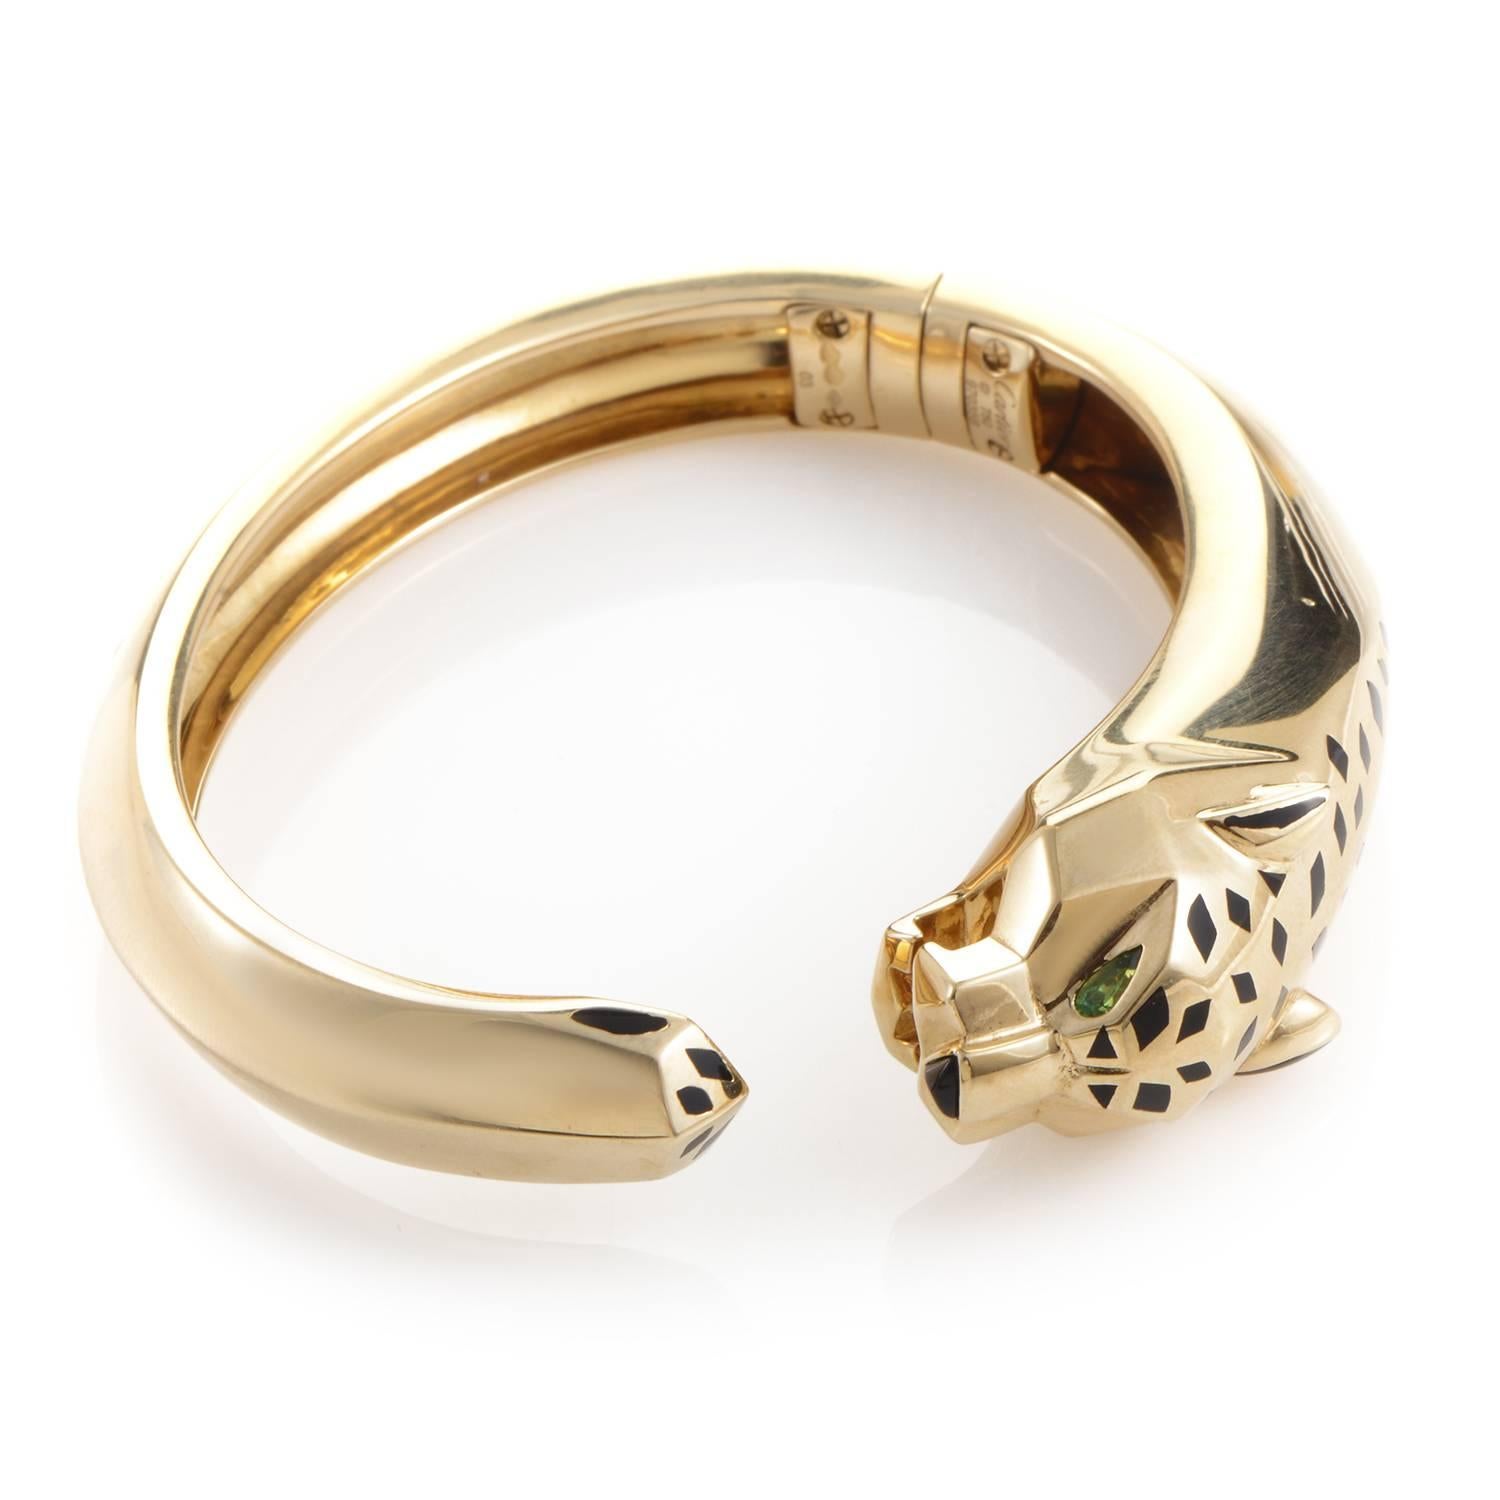 This bangle bracelet from Cartier's Panthere Collection is a gorgeous iconic piece. The bracelet is made of 18K yellow gold and is shaped in the likeness of a panther. The panther's head is accented with black lacquer spots and a black onyx nose.